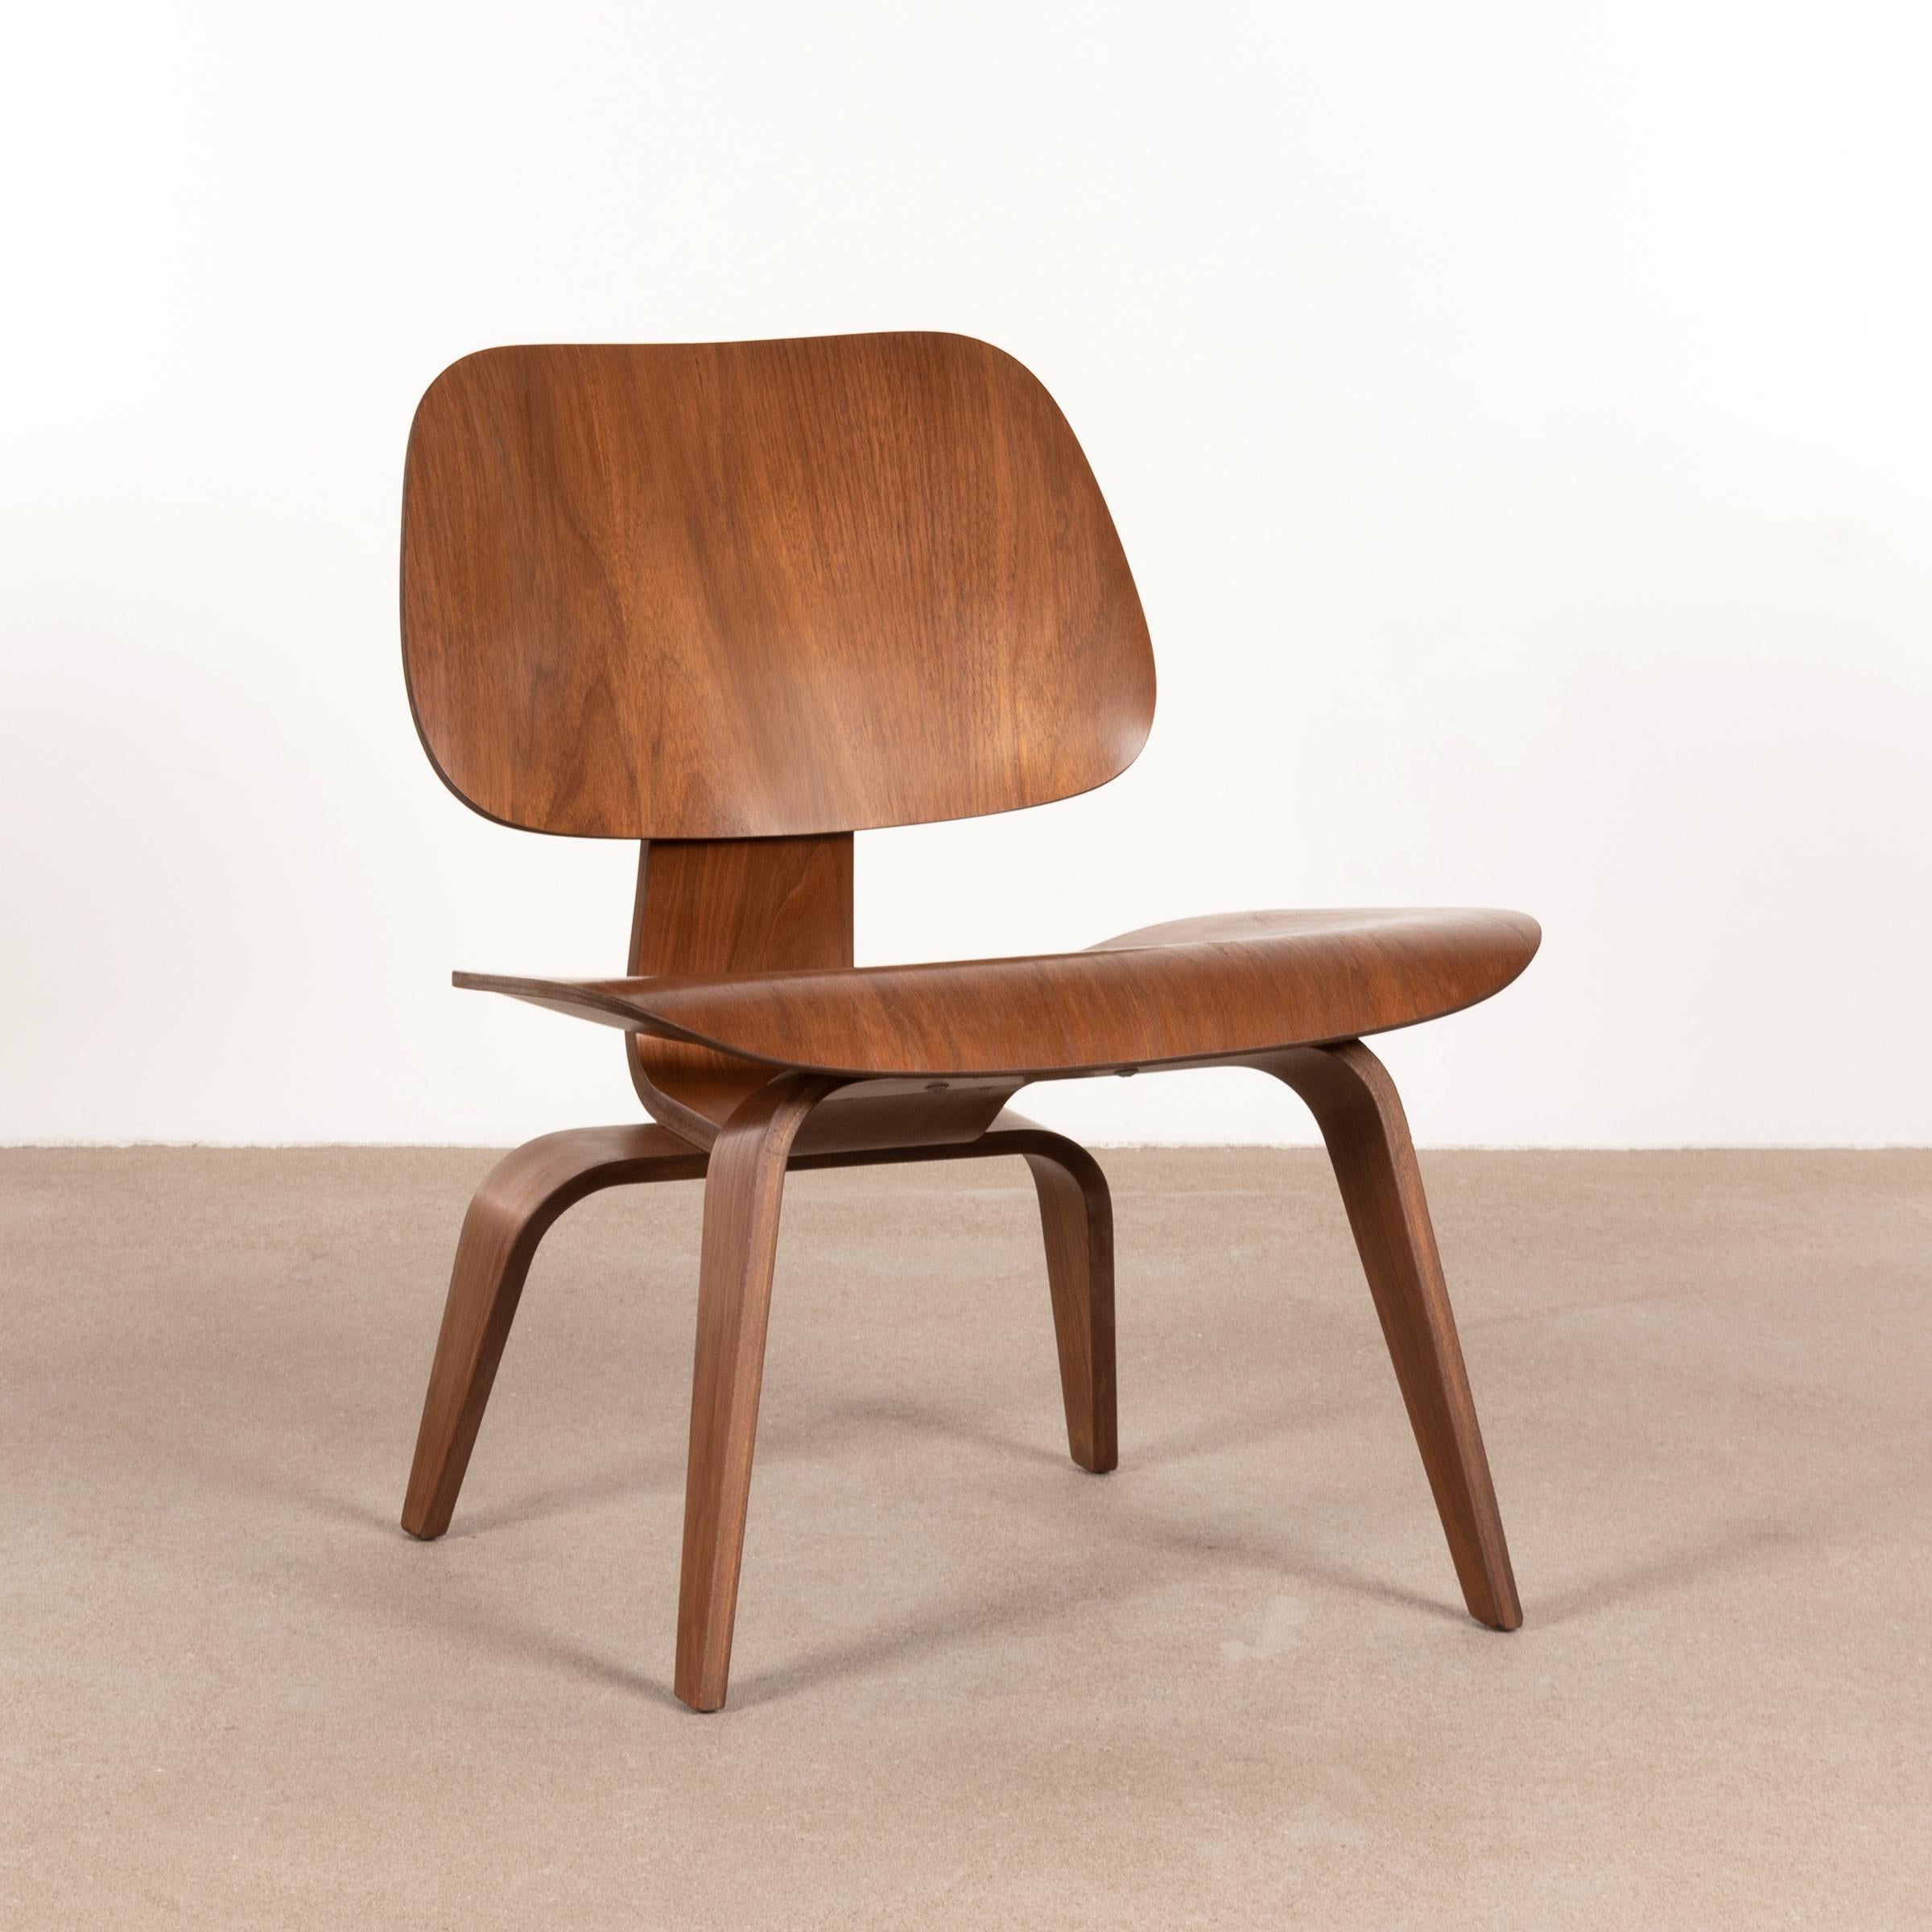 Mid-20th Century Charles & Ray Eames Early LCW Walnut Lounge Chair for Herman Miller